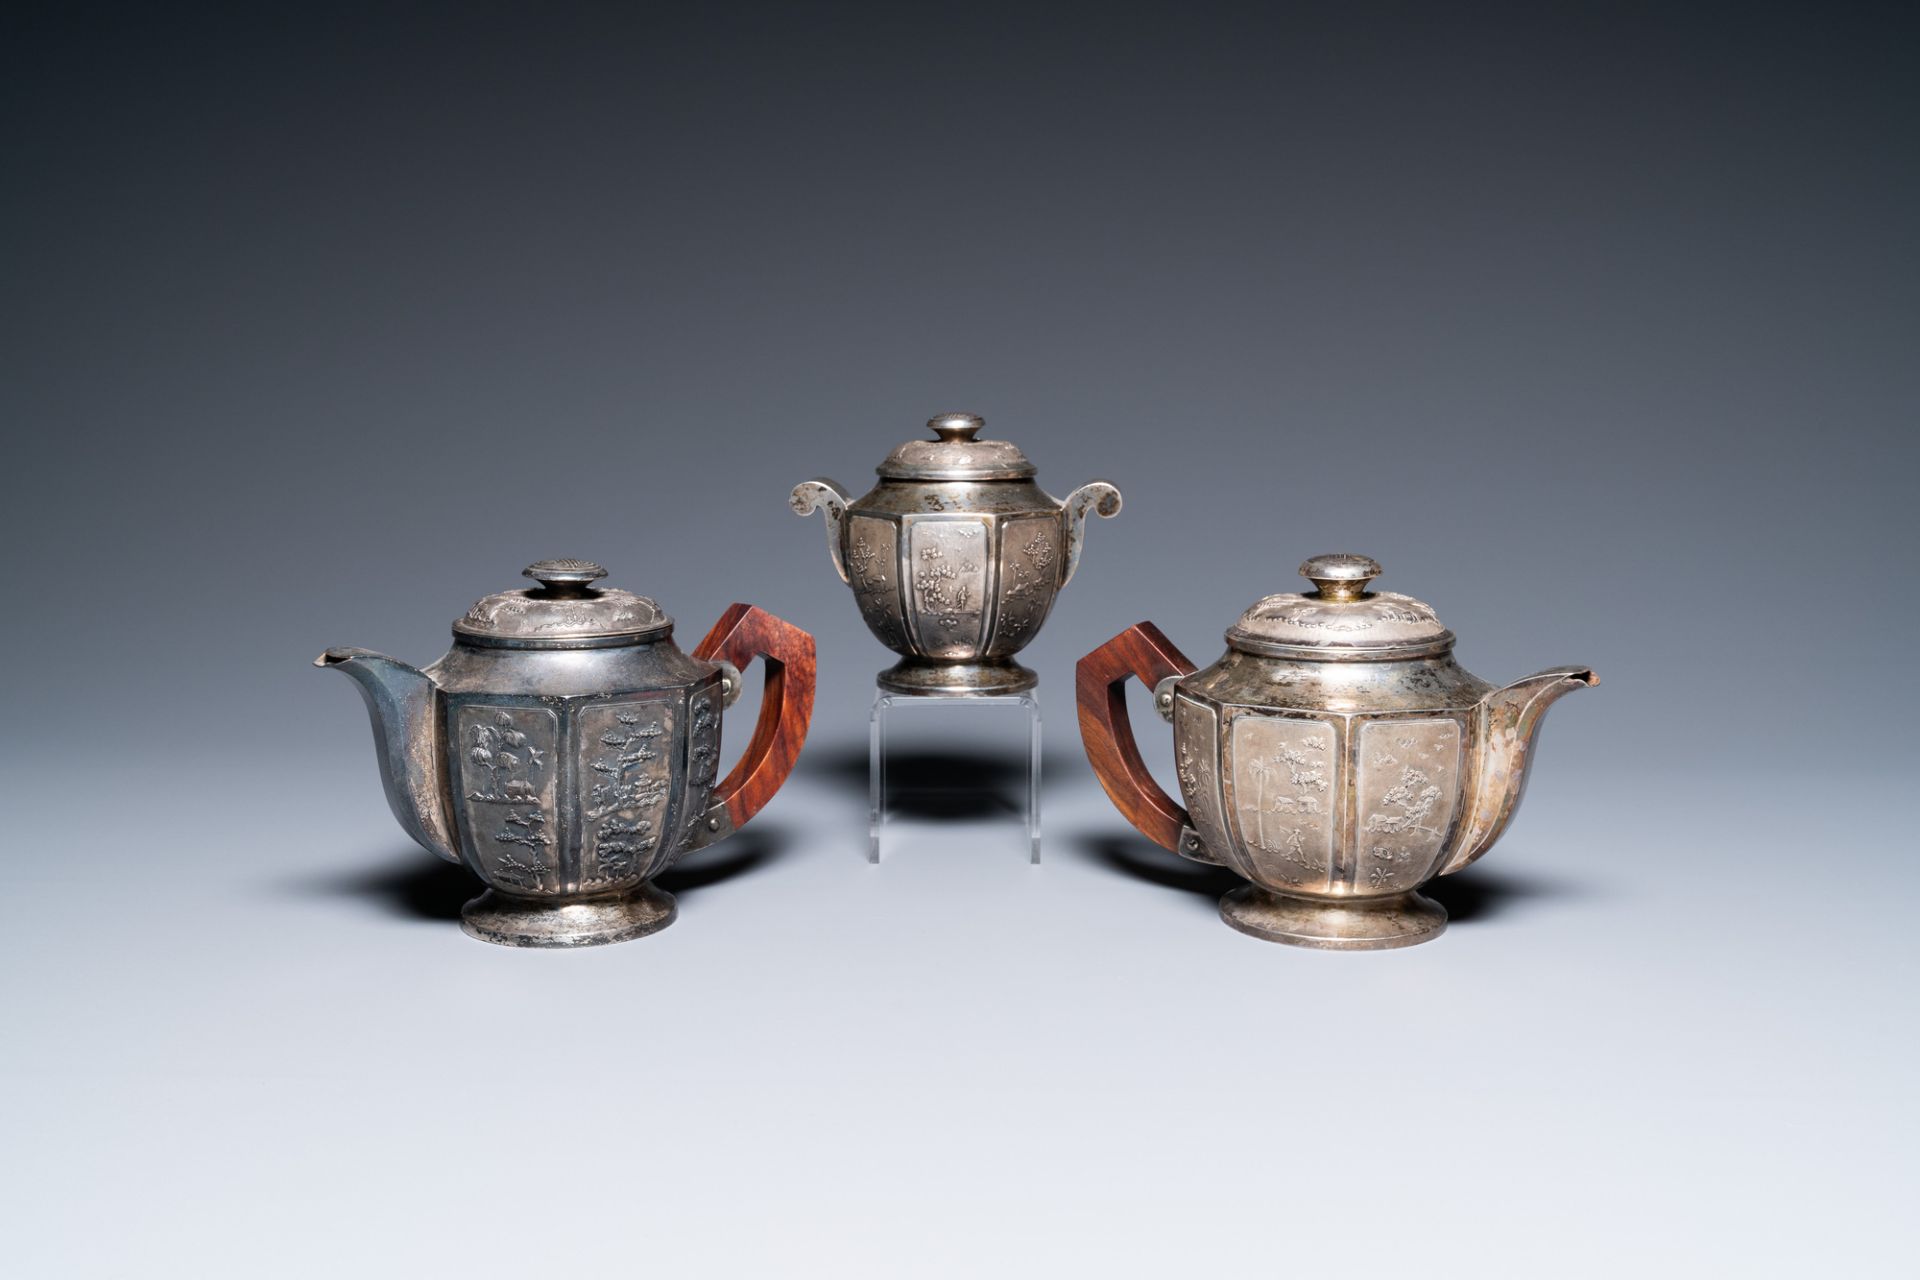 Two Vietnamese silver teapots and a sugar bowl and cover, marked Donghung, ca. 1900